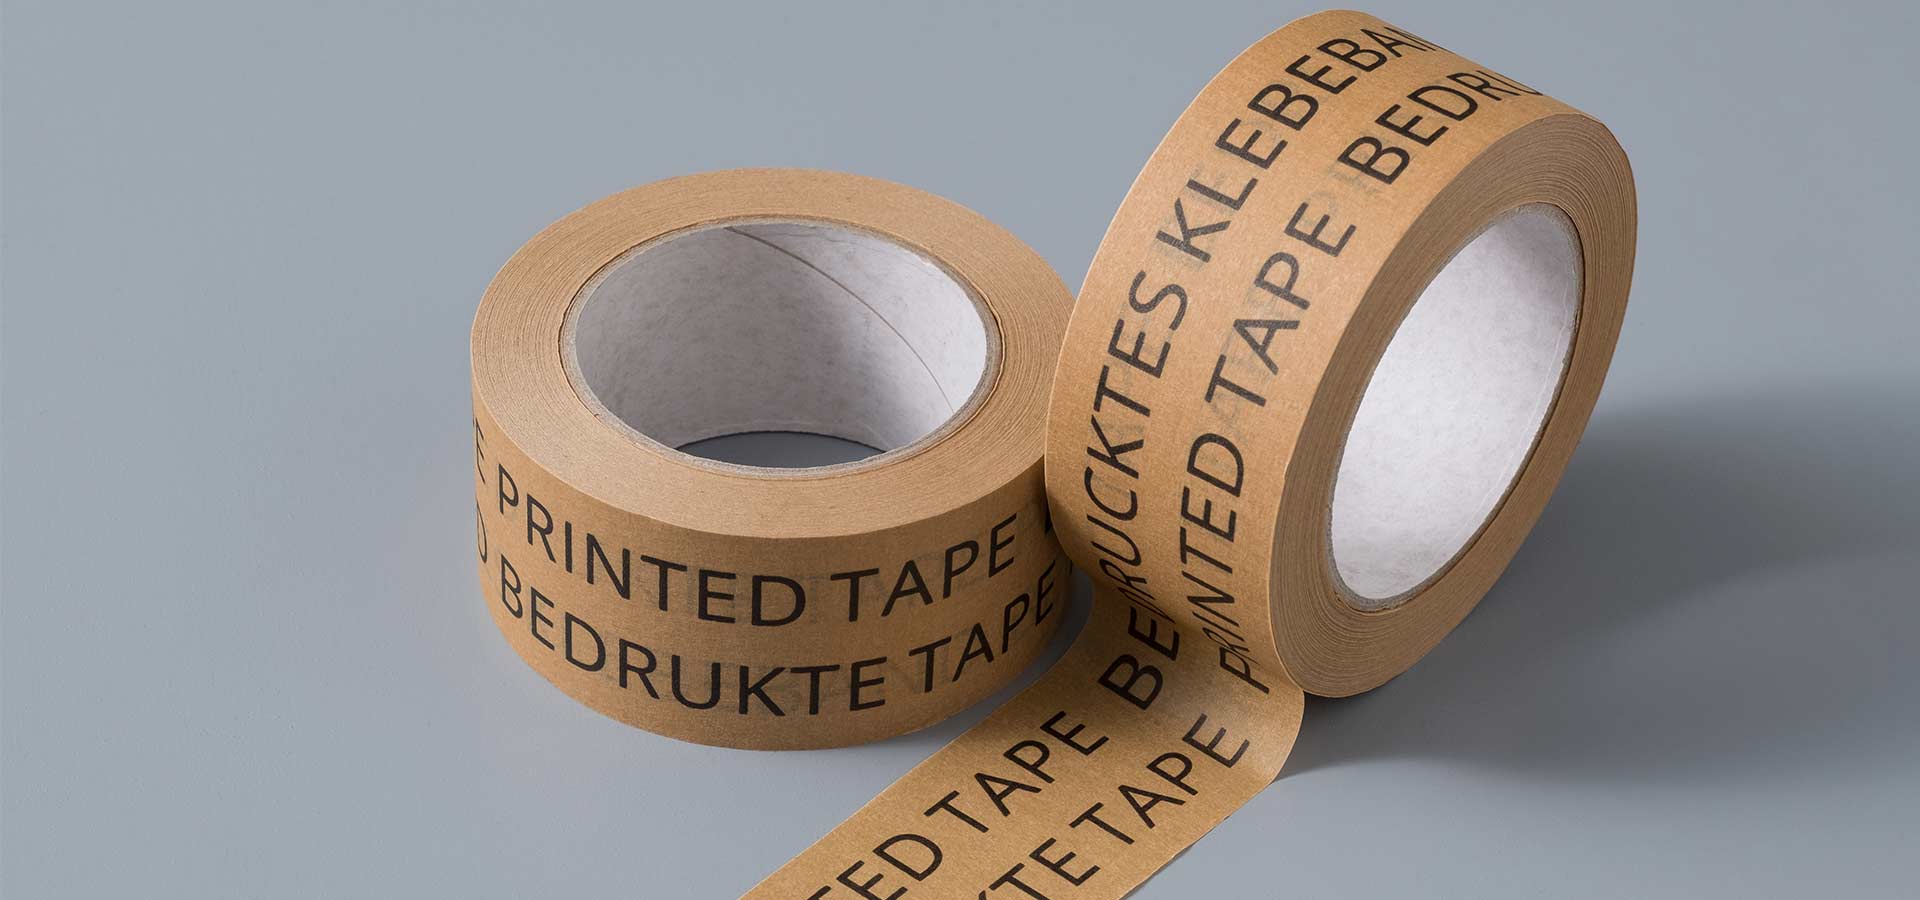 Label Tapes Market Analysis, Trends, Growth Projections, and Forecast to 2032: Expanding Applications in Various Industries Fueling Demand for Label Tapes